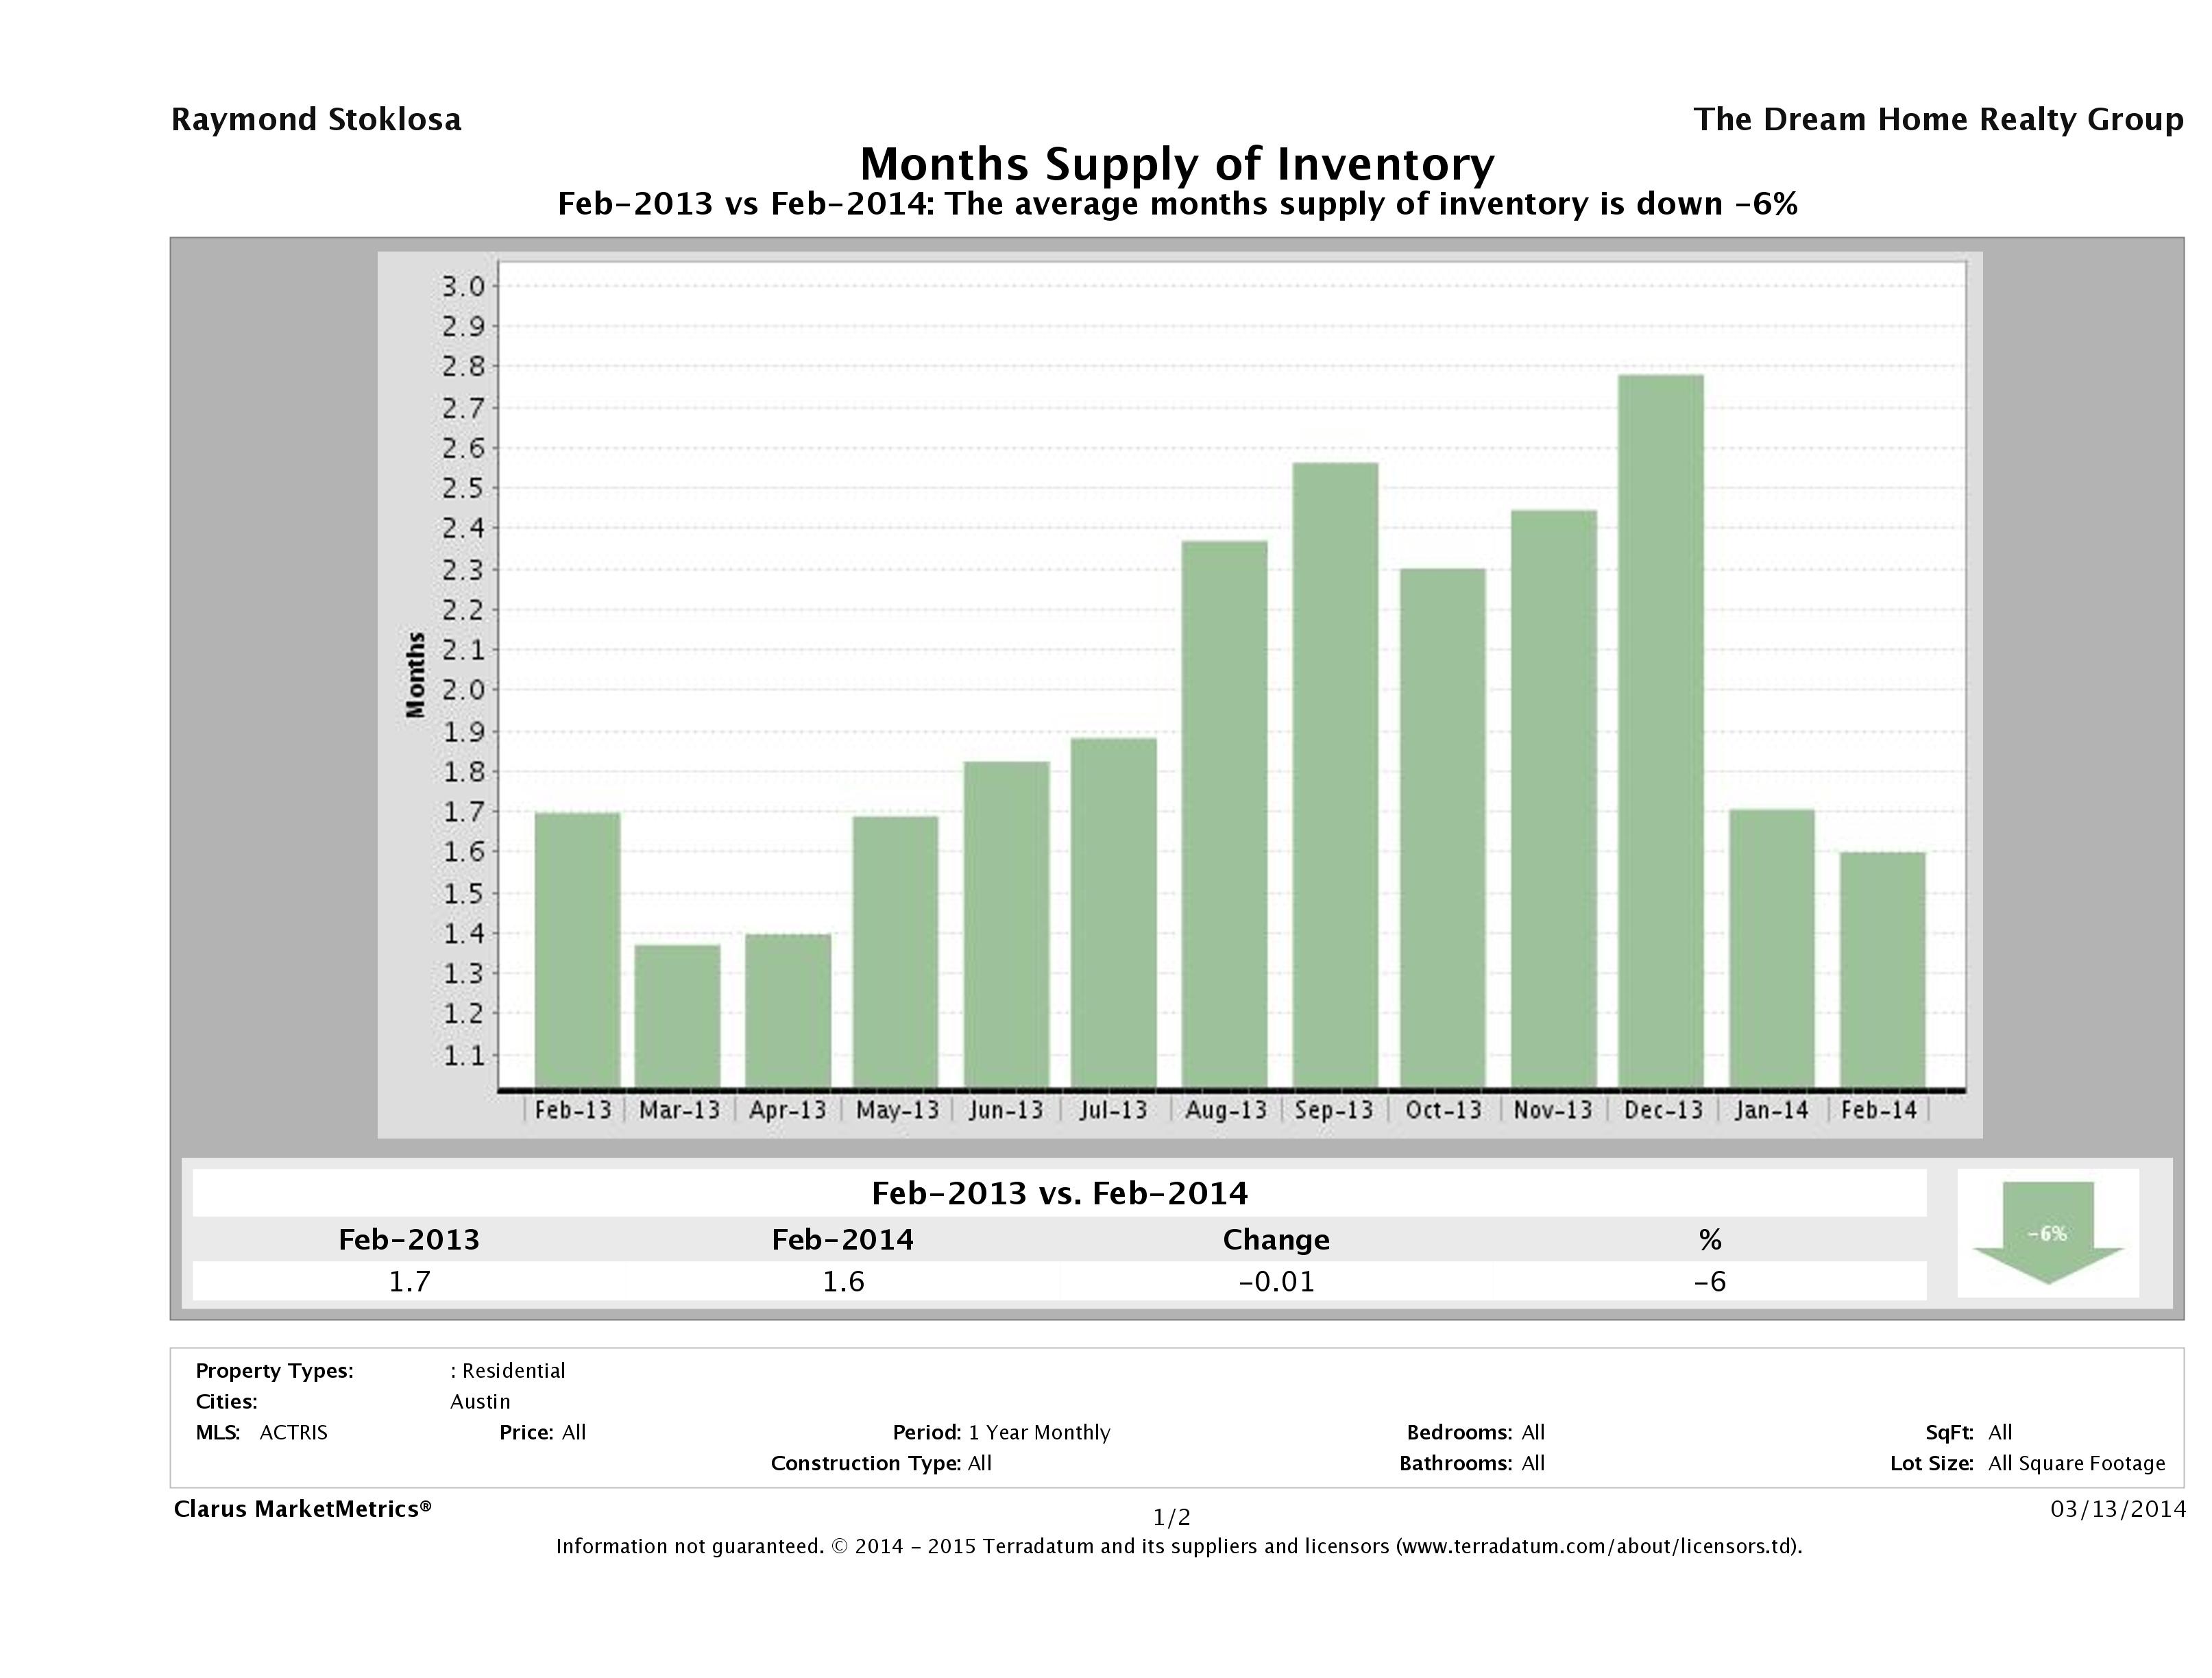 Austin single family home months inventory February 2014